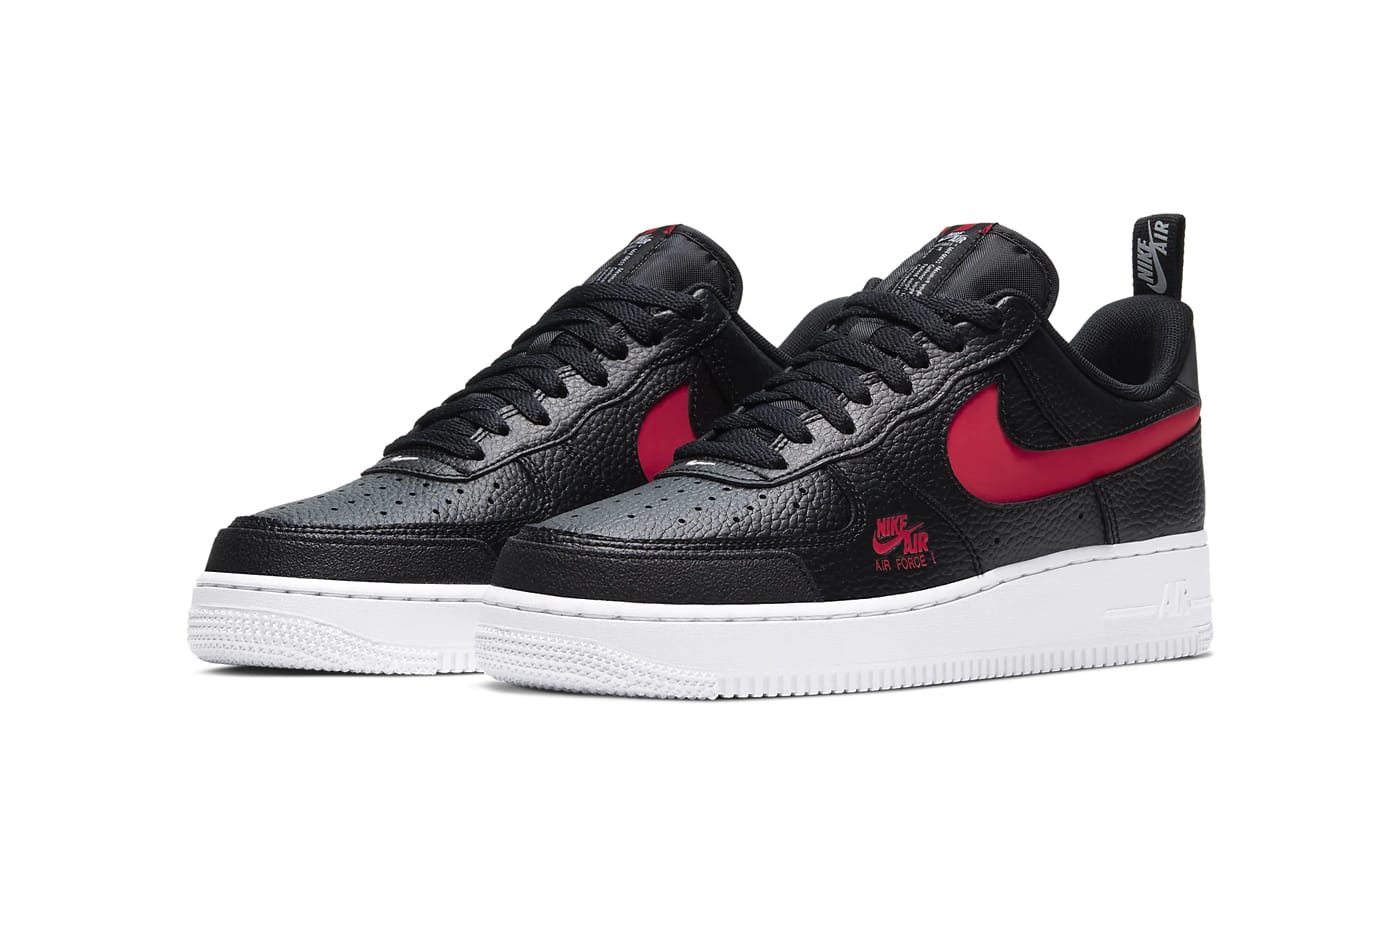 nike air force 1 lv8 red and black